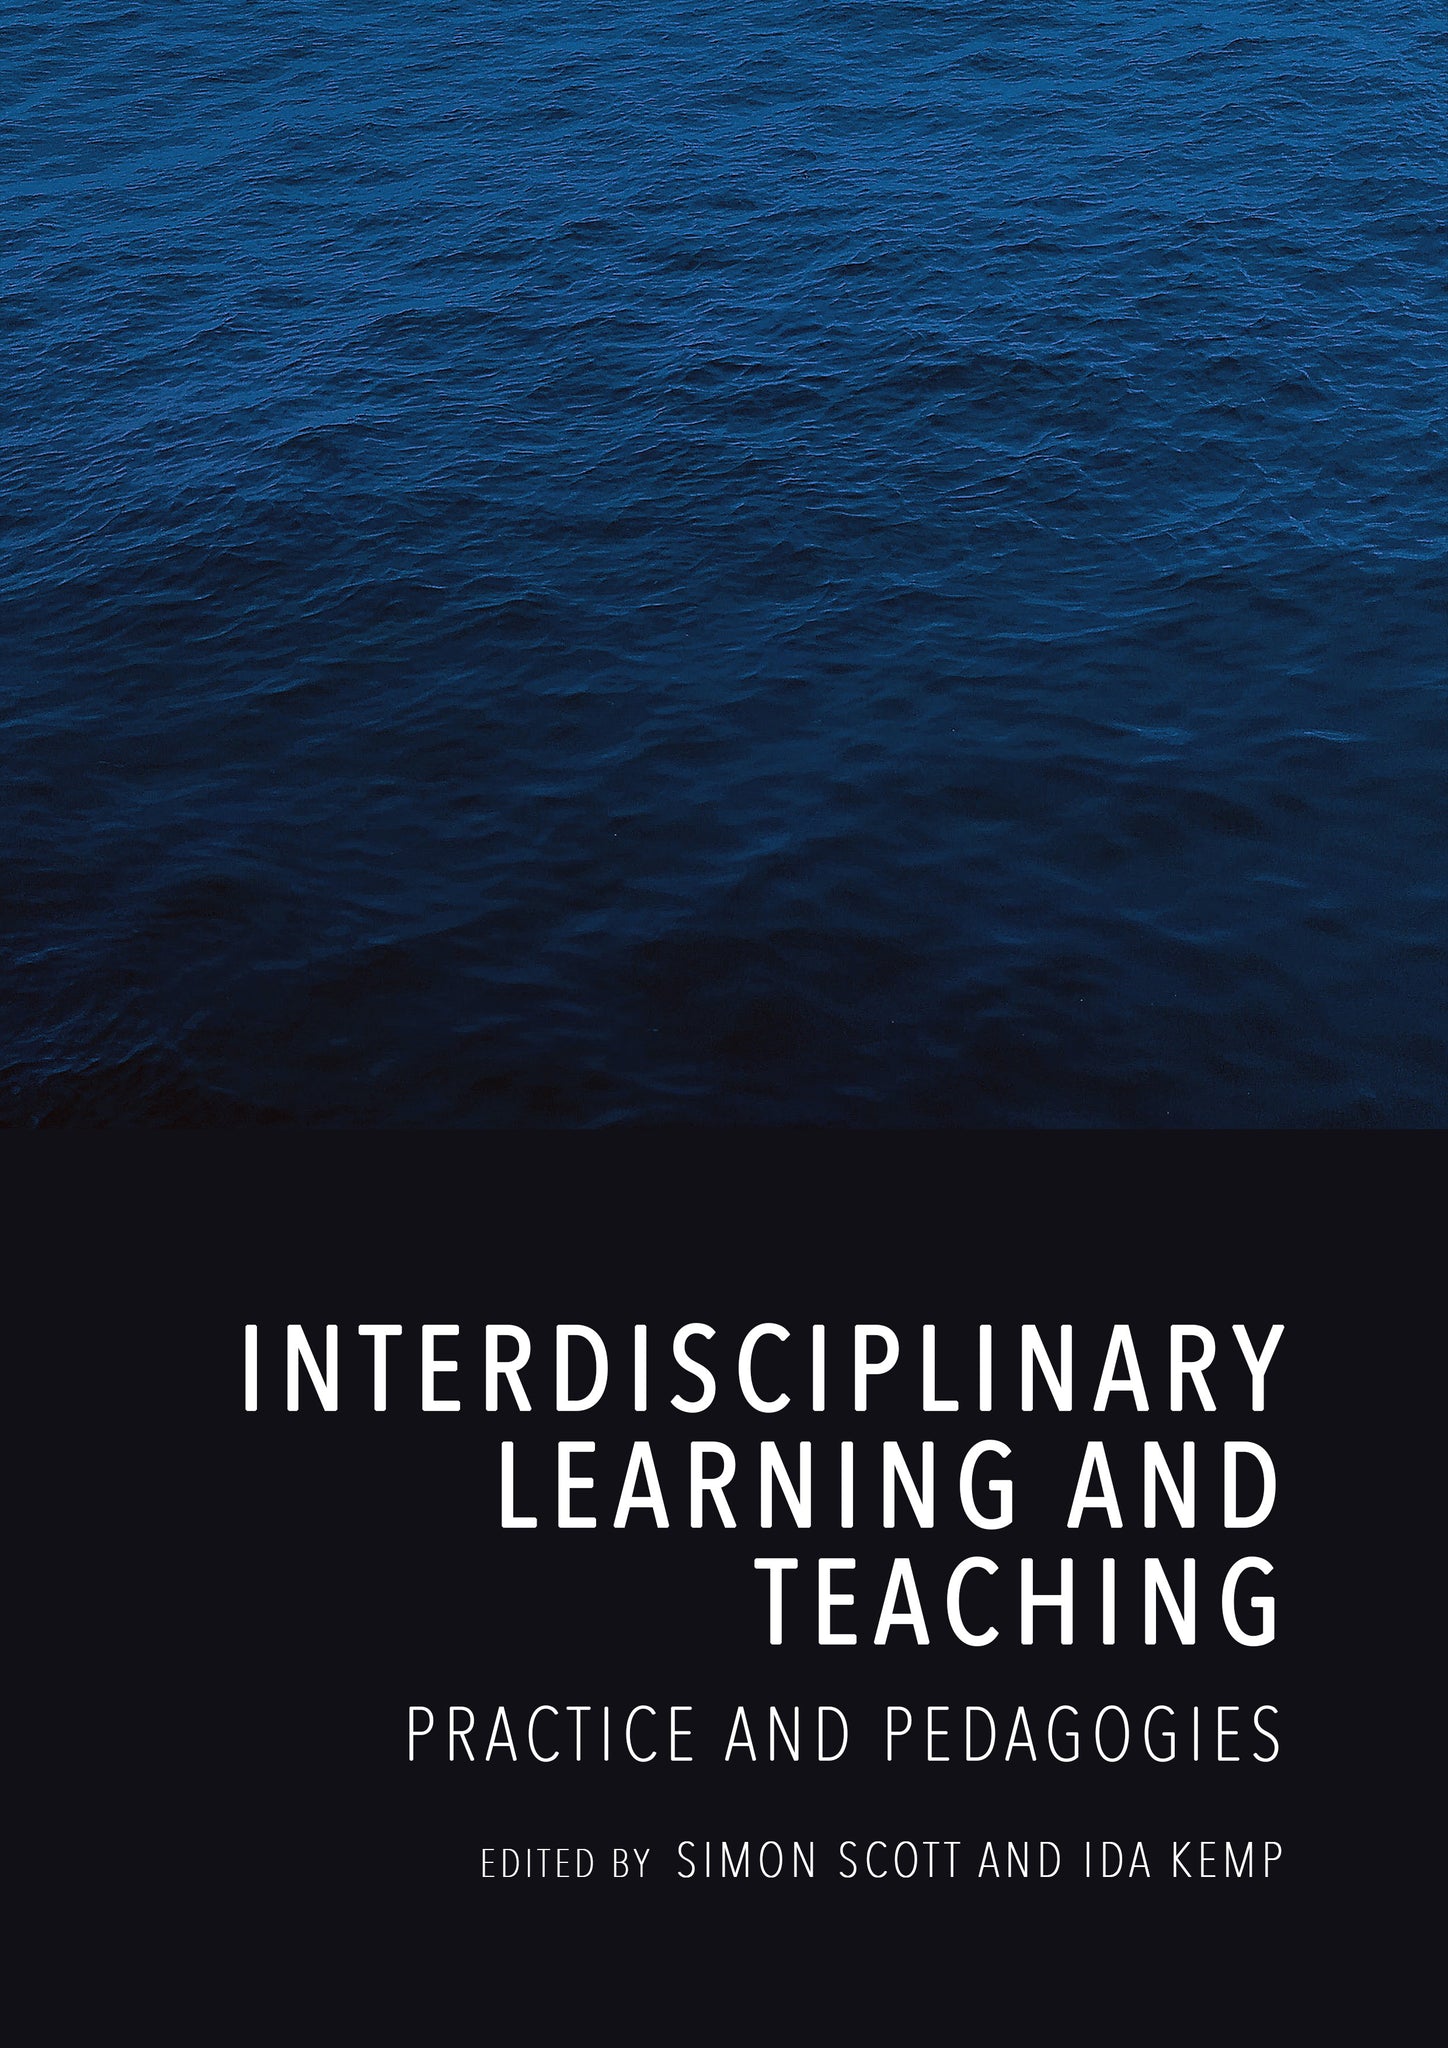 Interdisciplinary Learning and Teaching: Practice and Pedagogies